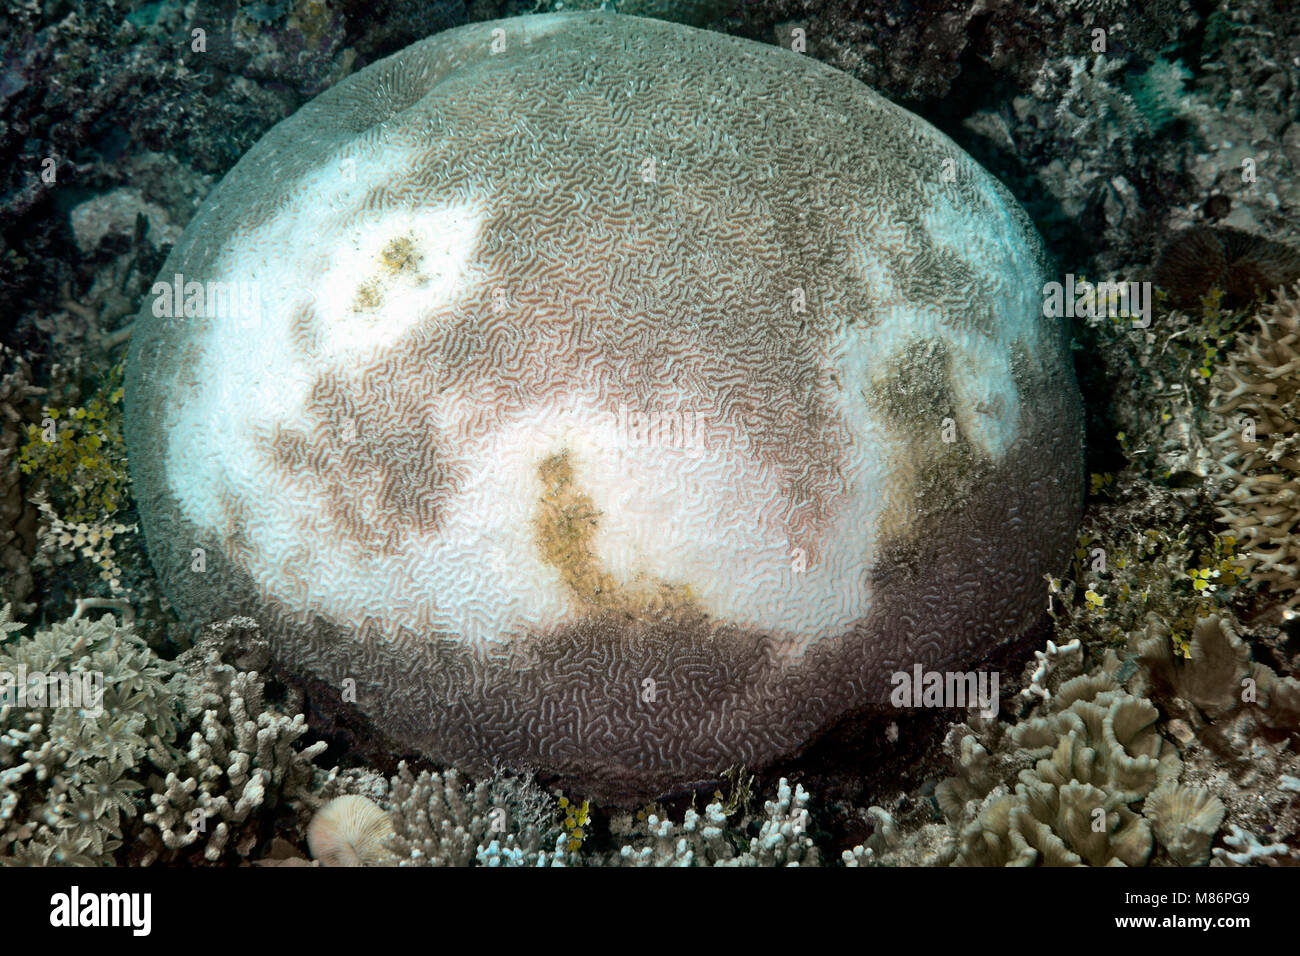 Brain Coral showing severe bleaching. Stock Photo